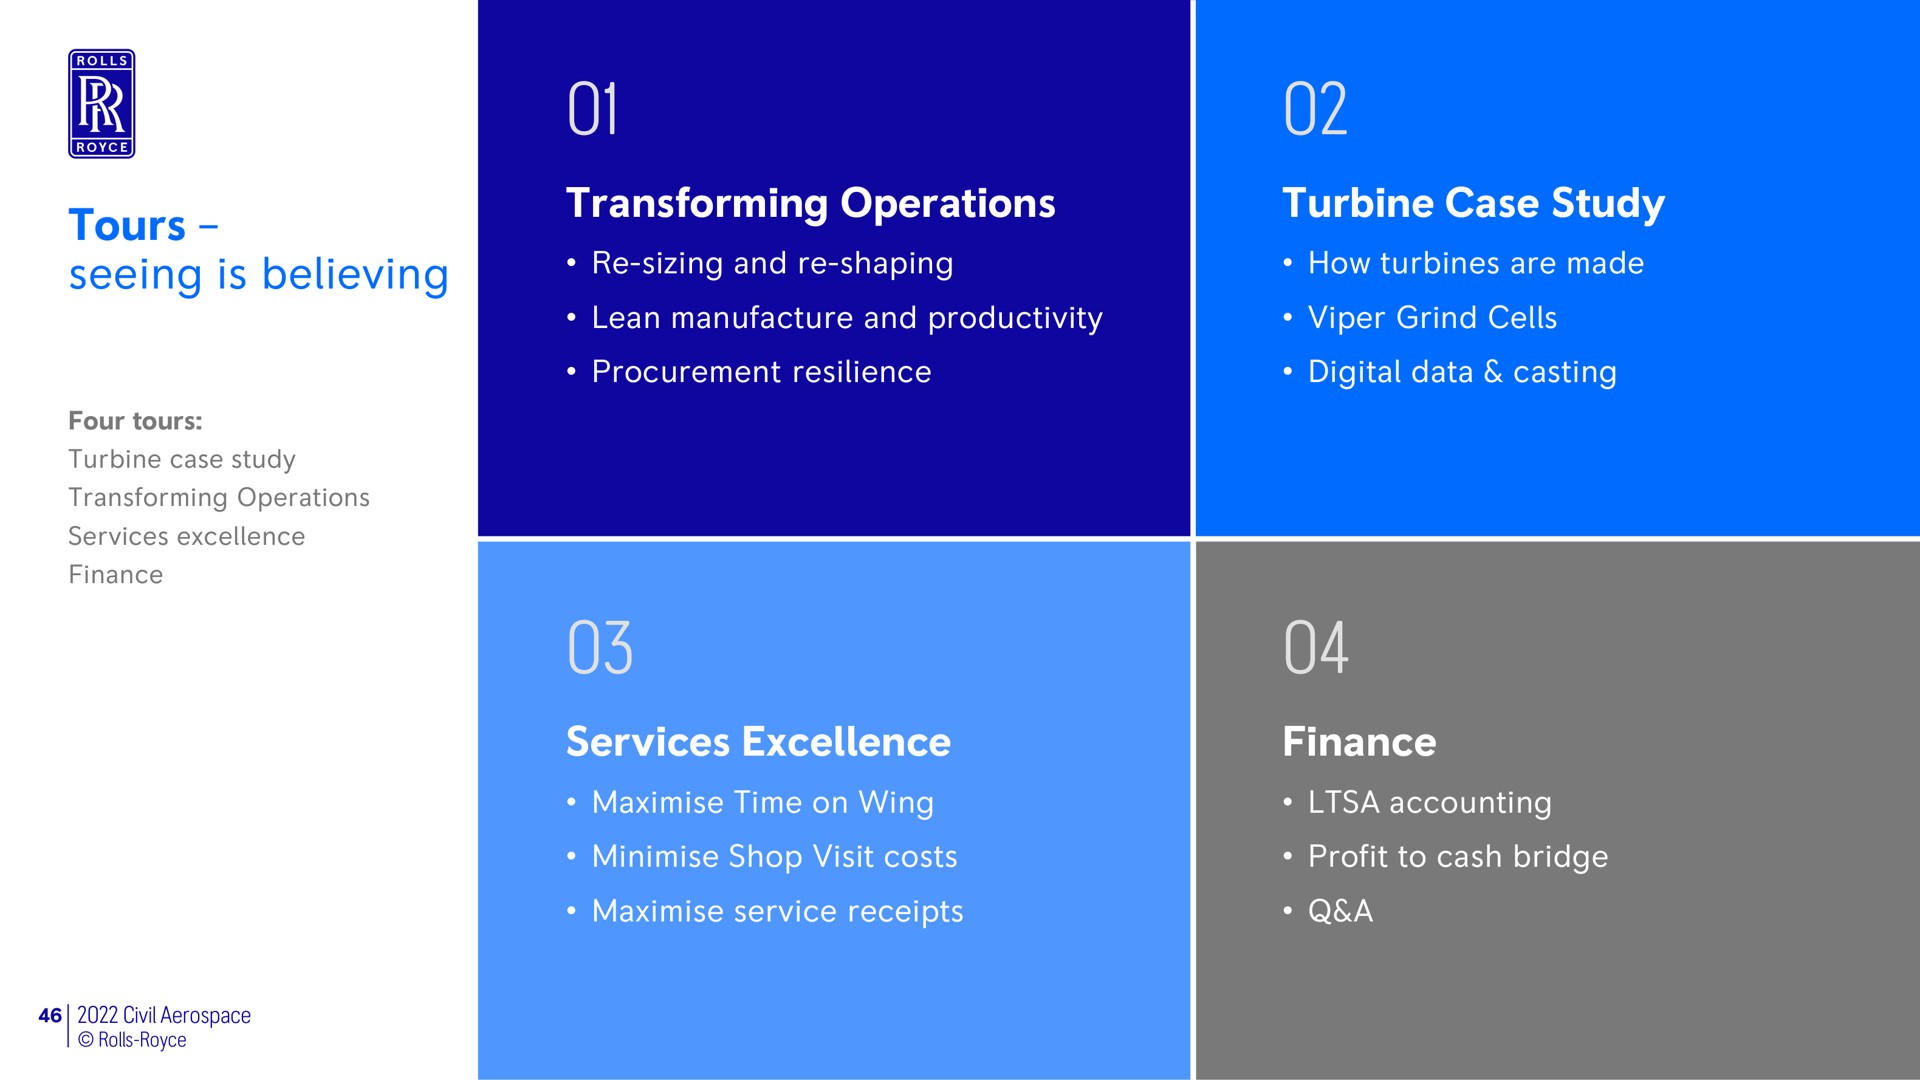 transforming operations turbine case study services excellence finance tours seeing is believing or | Rolls-Royce Holdings